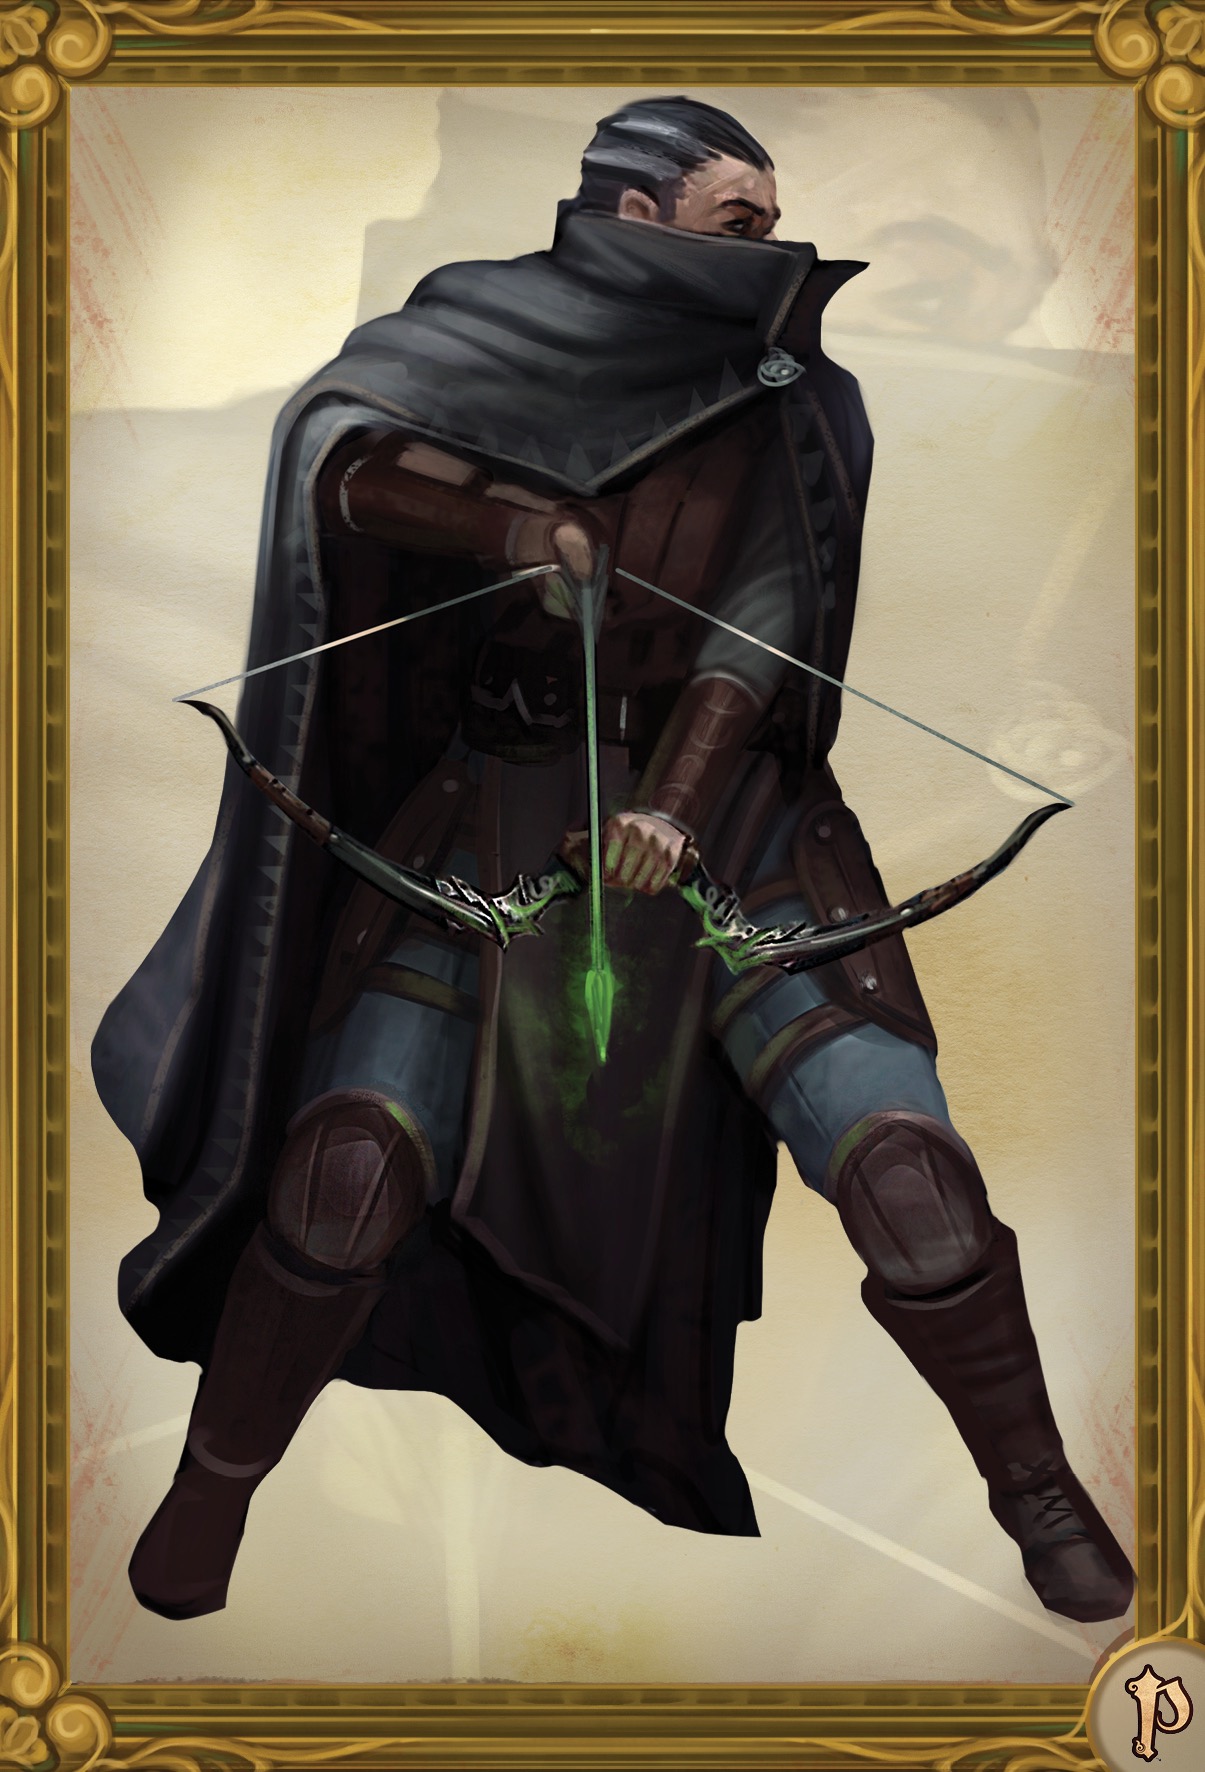 Pathfinder NPC Battle Card rogue in dark clothes with a glowing green arrow